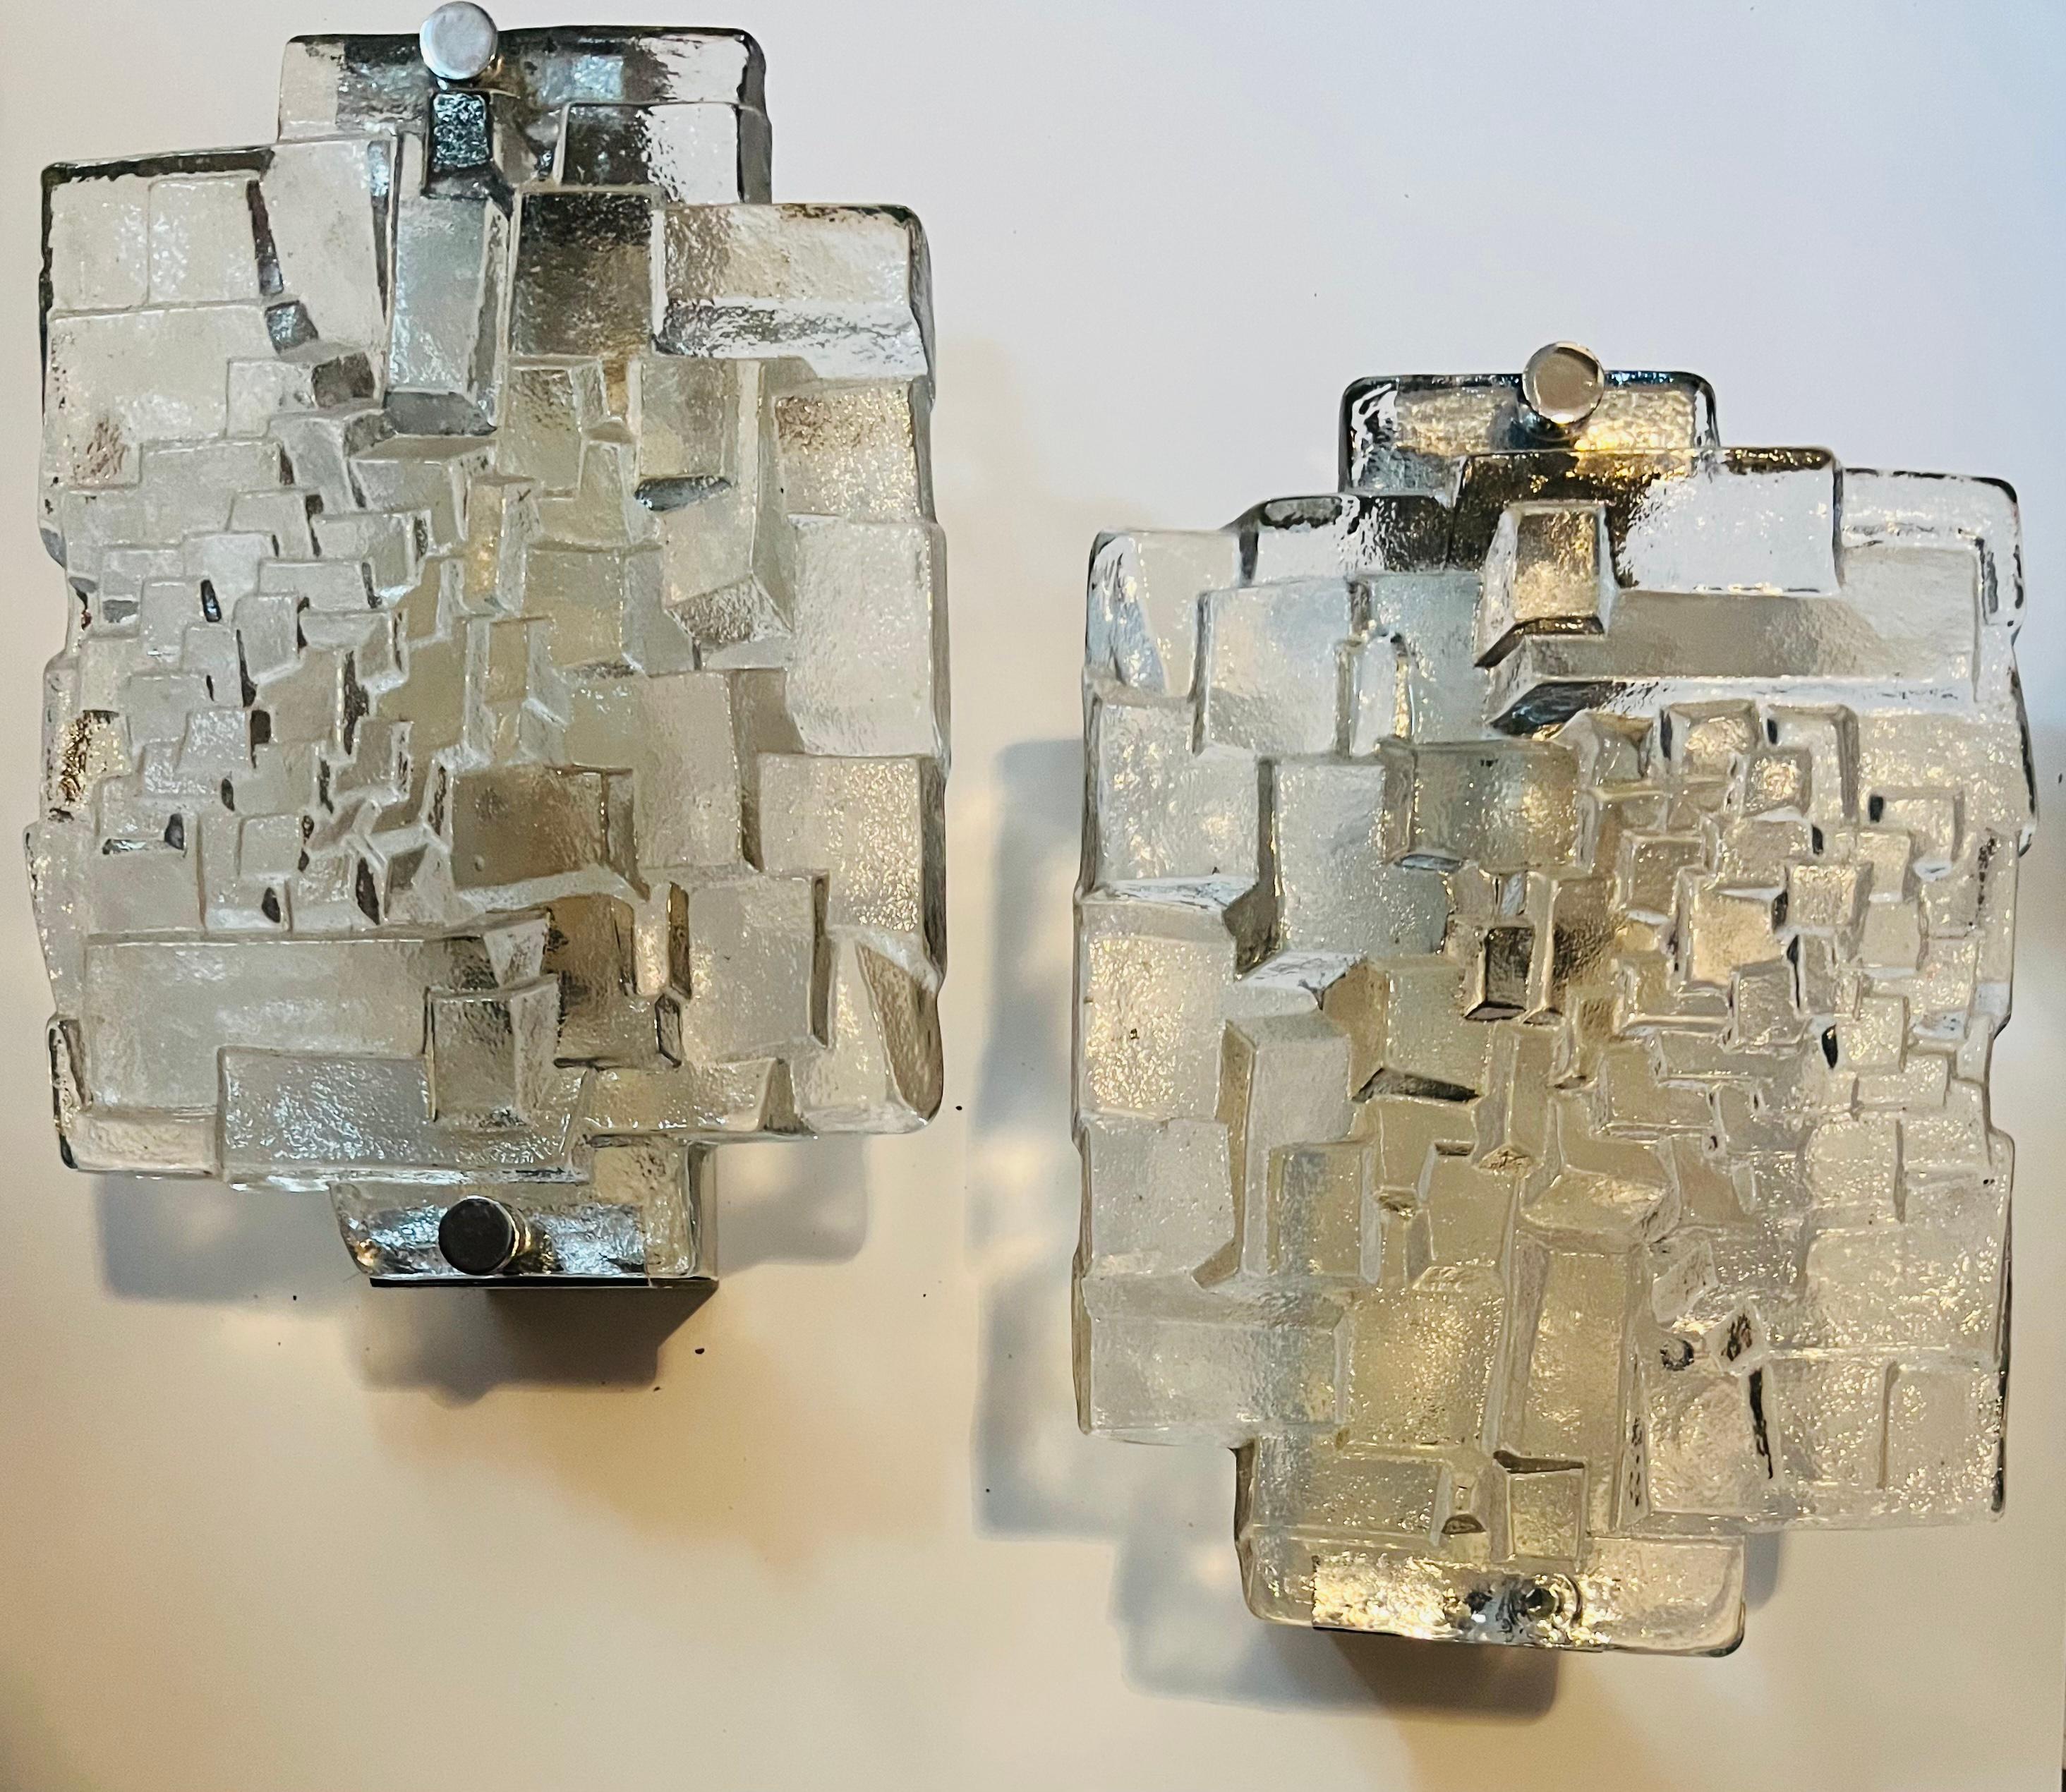 A great pair of 1960s thick textured glass sconces with chrome fittings by the lighting company, Hillebrand. Rewired.